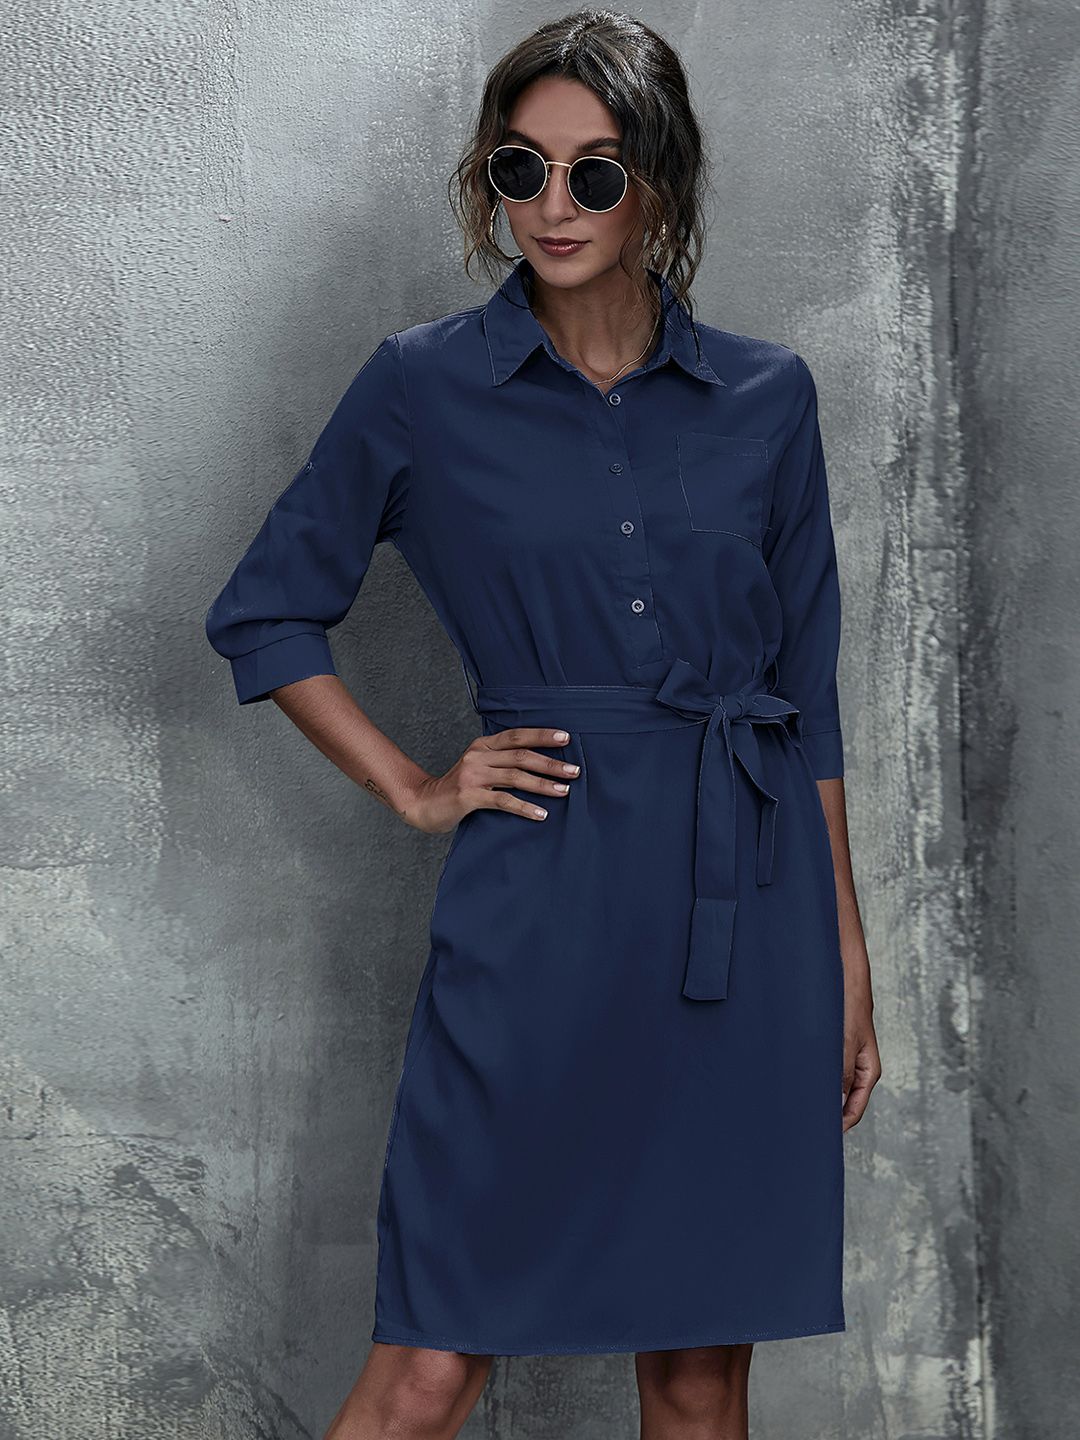 URBANIC Navy Blue Belted Shirt Dress Price in India